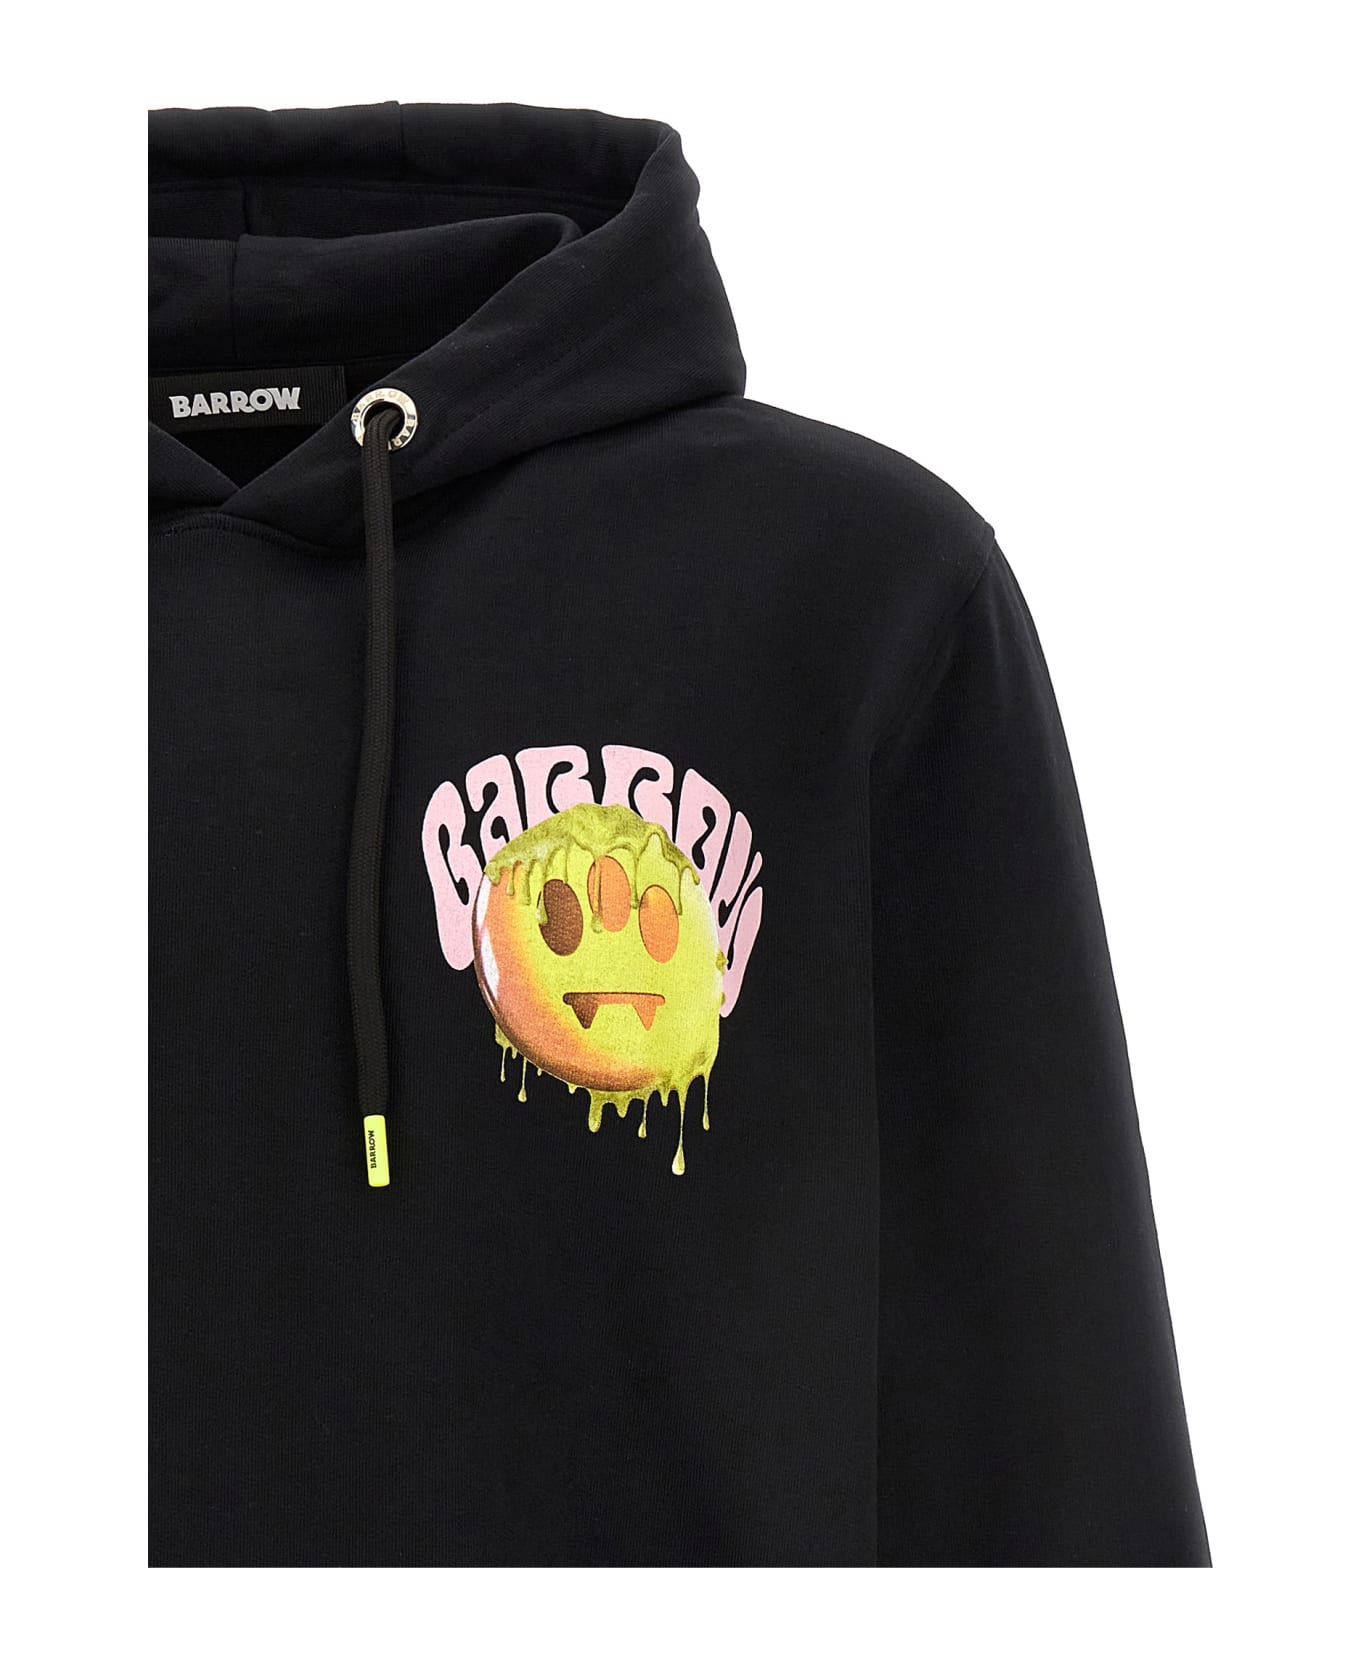 Barrow Black Hoodie With Front And Back Graphic Print - Black